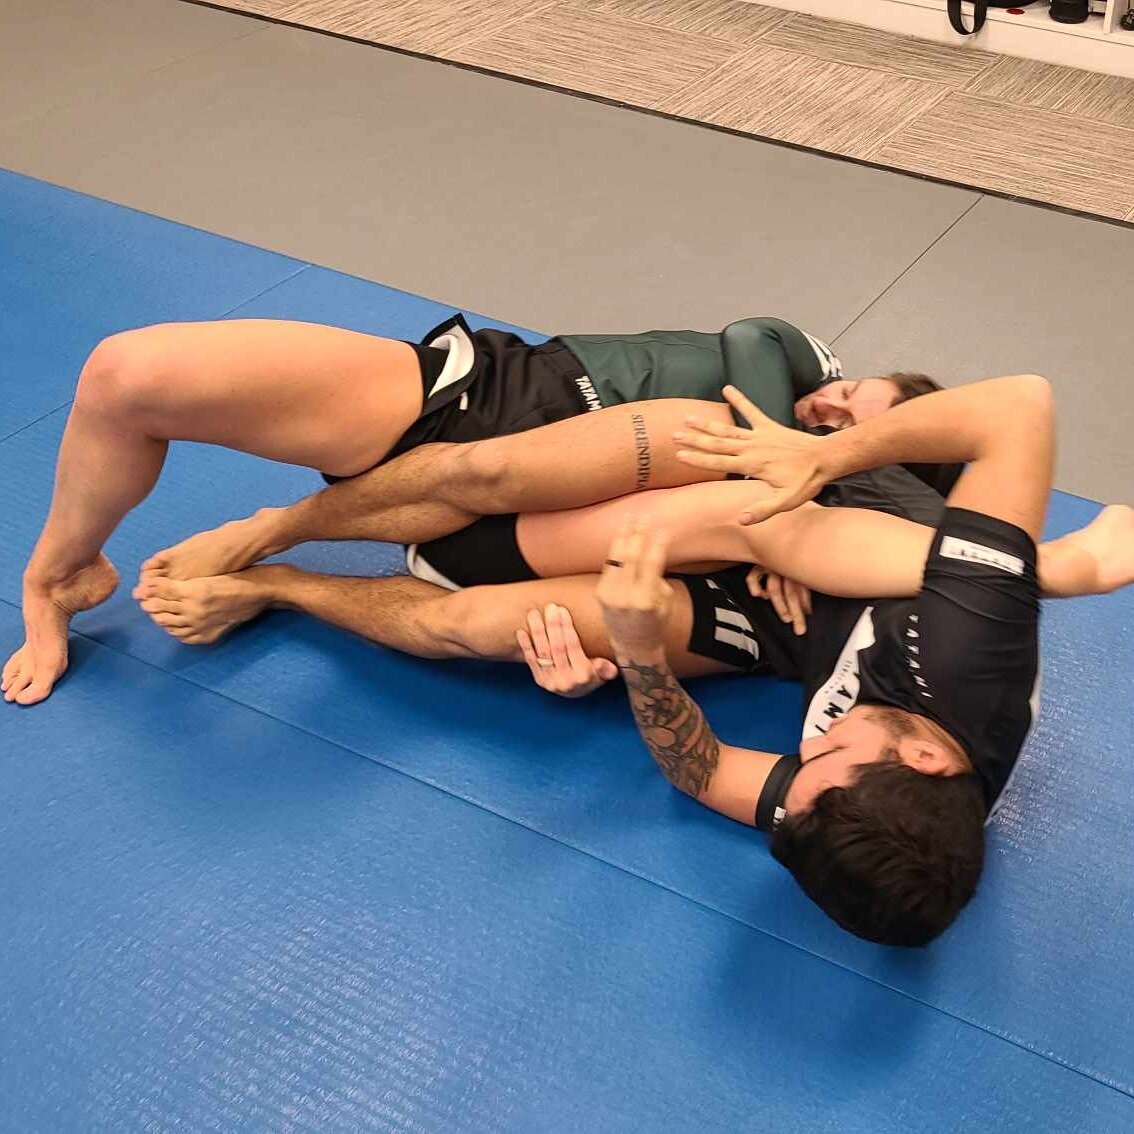 Thursday Nogi @ 6 PM

Try 3 FREE classes with no commitment! Call us at 843-812-4222 or visit www.mayriverbjj.com for more information.